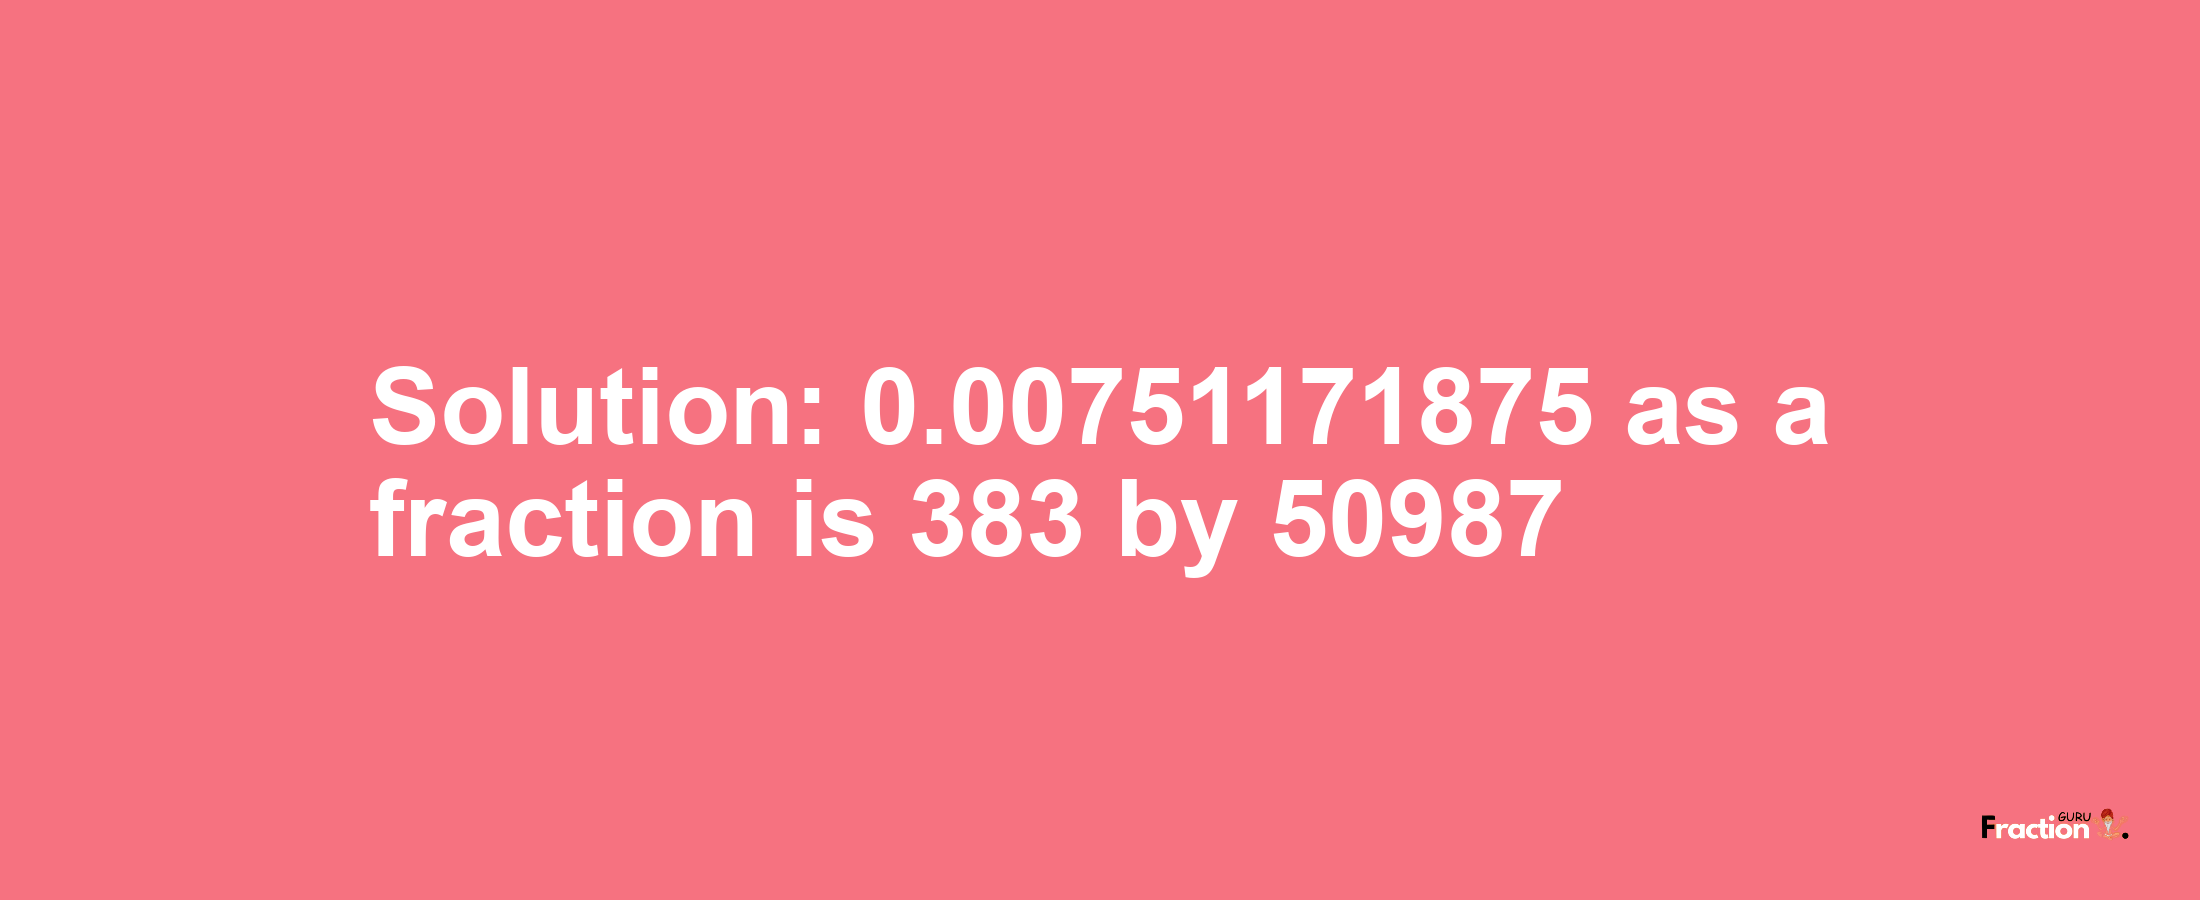 Solution:0.00751171875 as a fraction is 383/50987